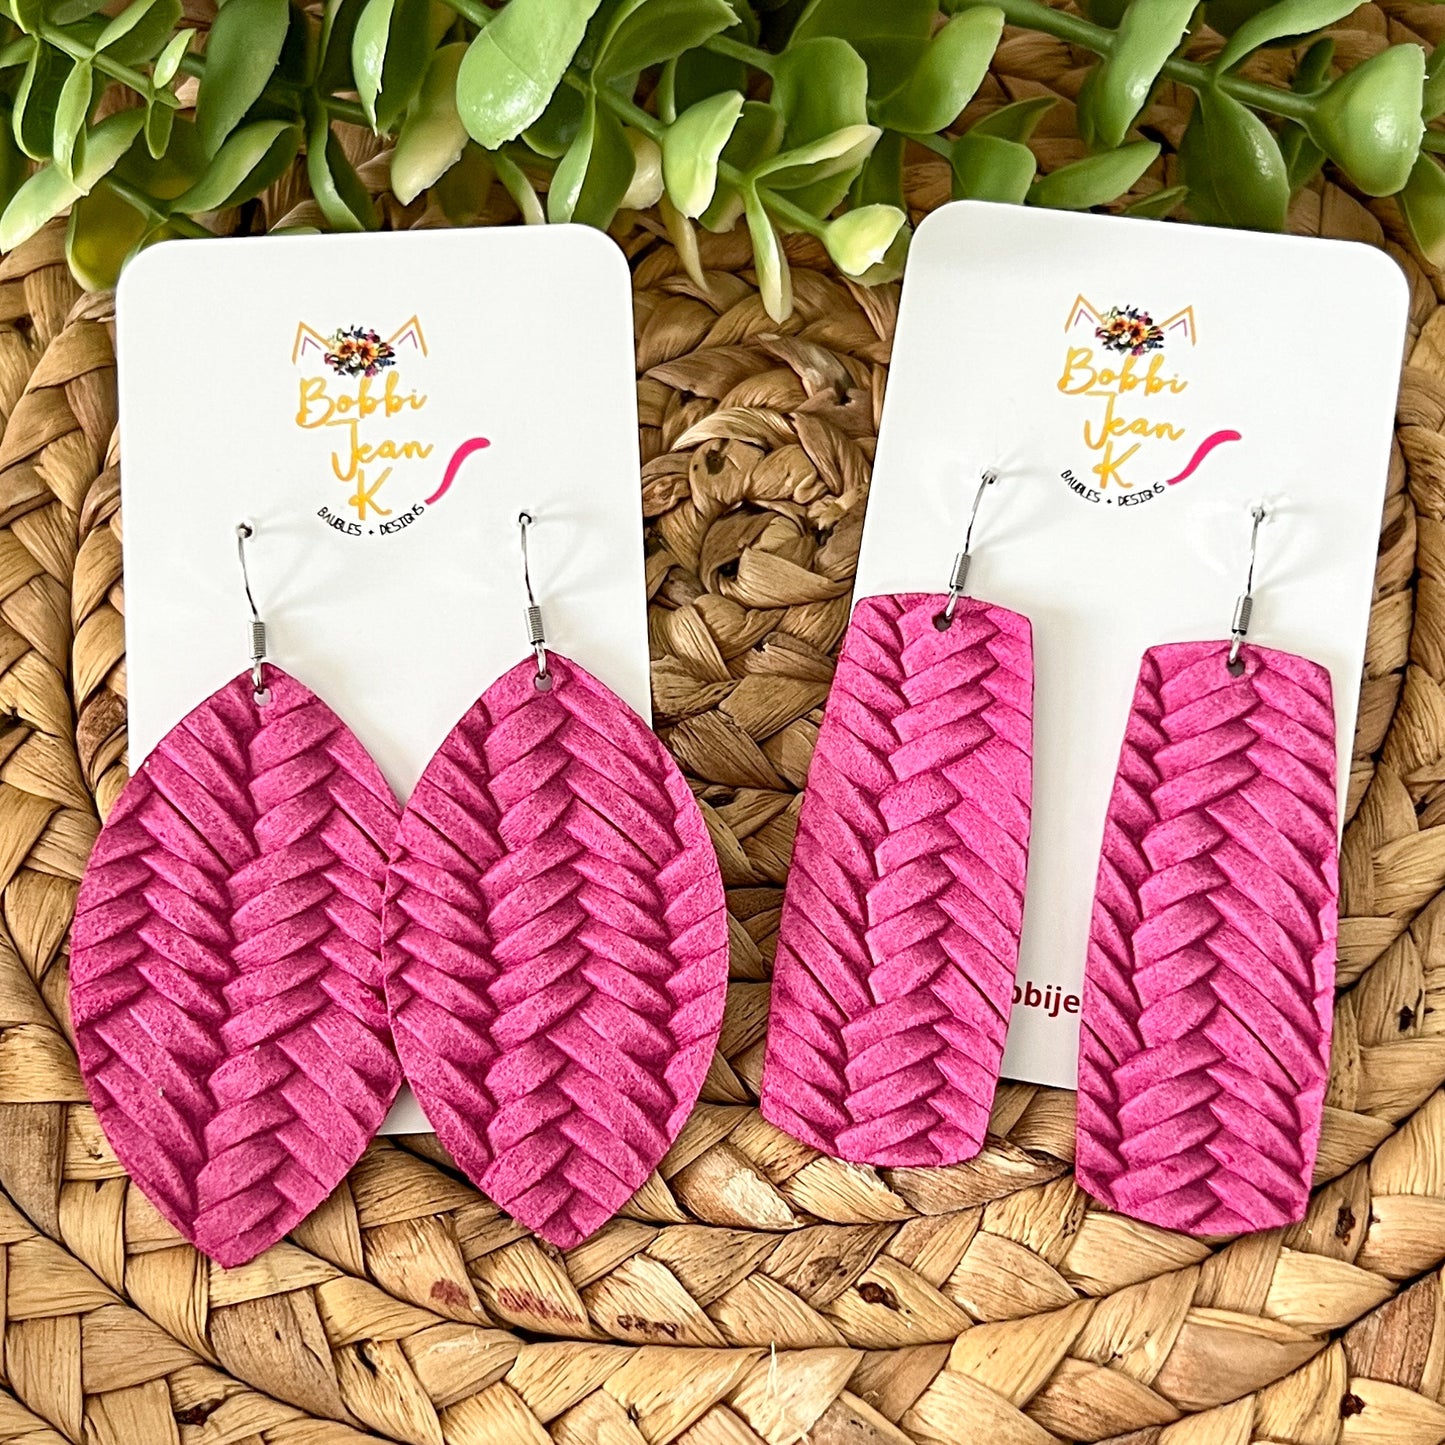 Raspberry "Fishtail Braided" Embossed Leather Earrings: Choose From 2 Styles - LAST CHANCE